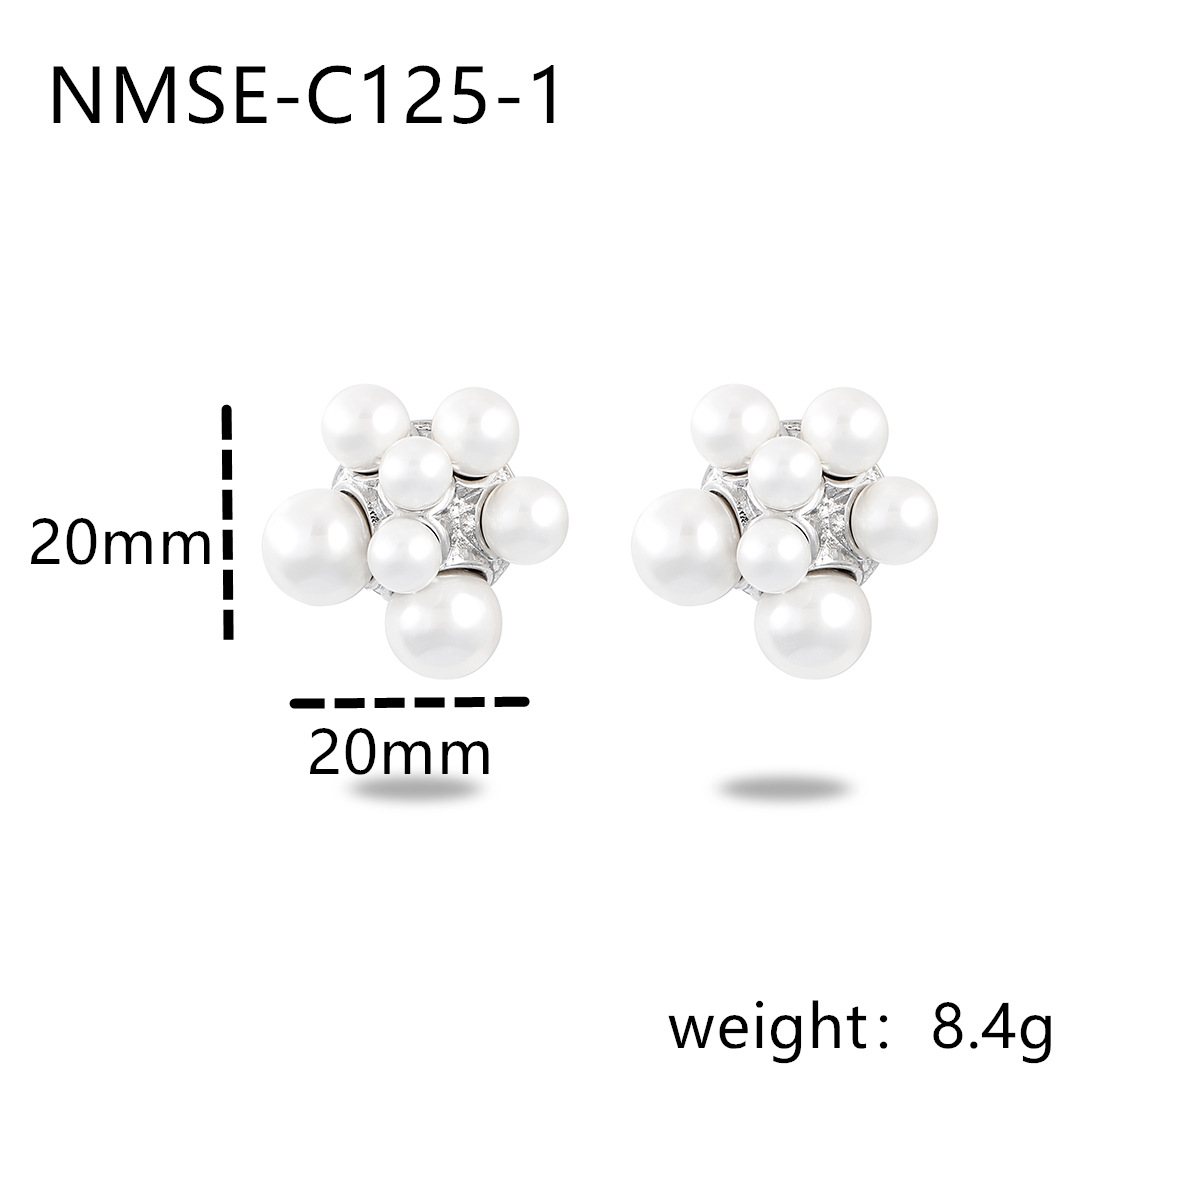 4:NMSE-C125-1